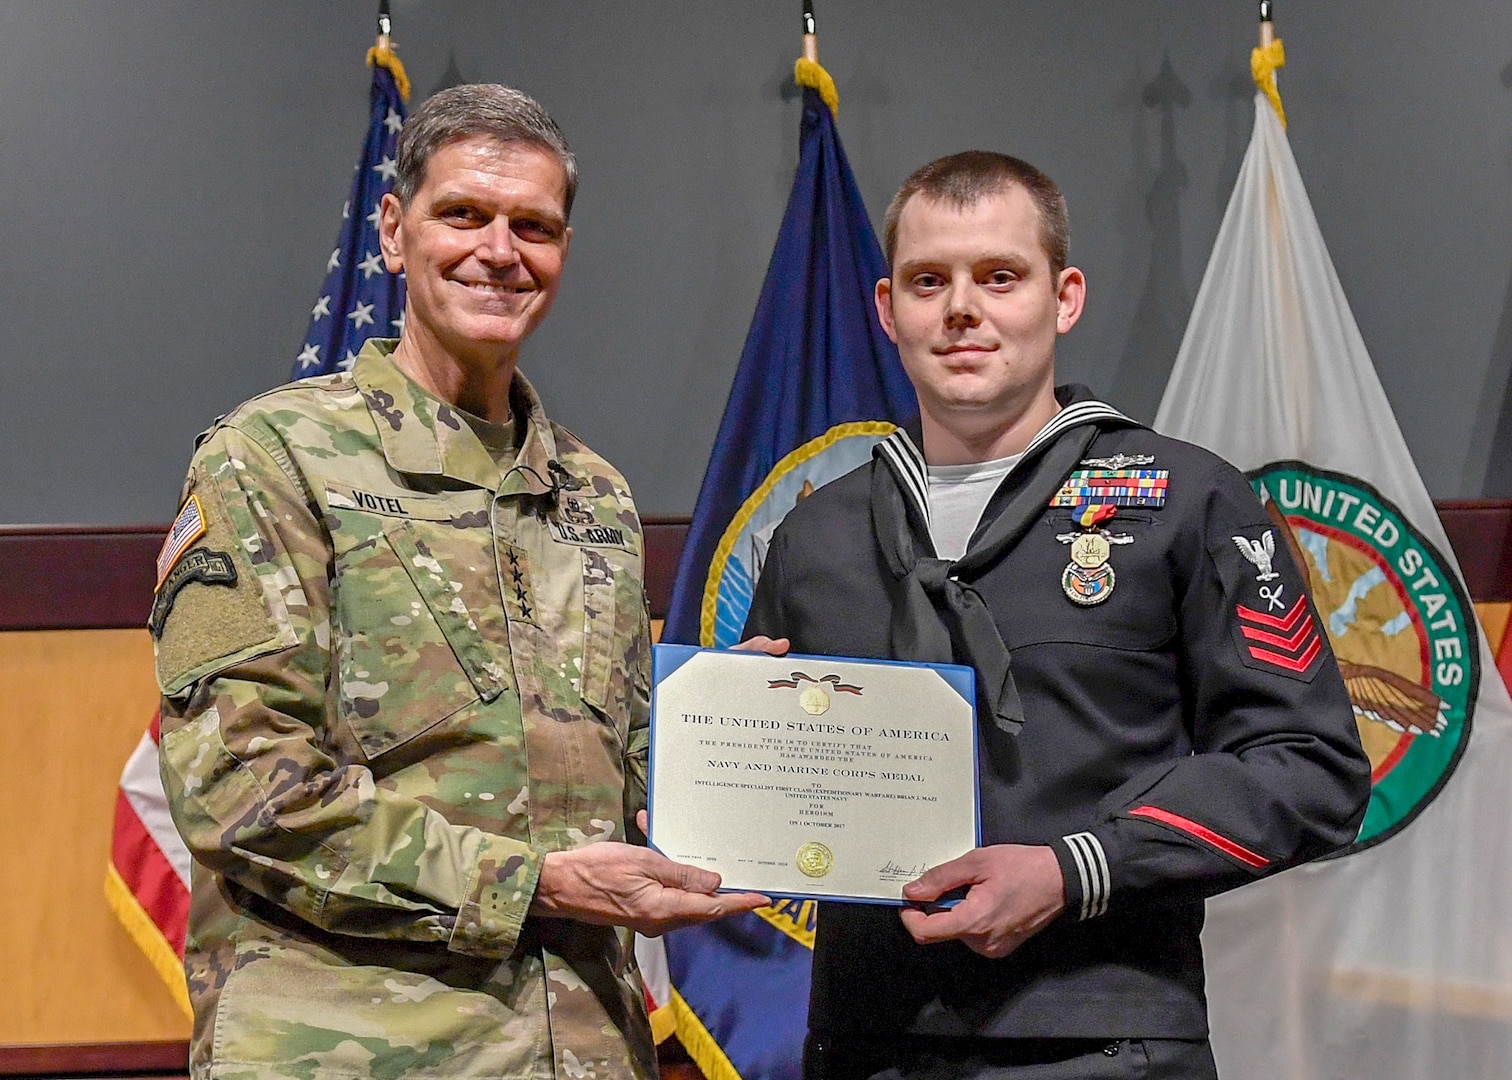 U.S. Army Gen. Joseph Votel, U.S. Central Command commander (left), presents U.S. Navy Petty Officer 1st Class Brian Mazi, USCENTCOM intelligence specialist, with the Navy-Marine Corps Medal on Dec. 18. Mazi was recognized for his heroism during the October 2017 tragedy that left 58 dead and more than 500 wounded at a country music festival in Las Vegas. The award falls between the Distinguished Flying Cross and the Bronze Star in order of merit.